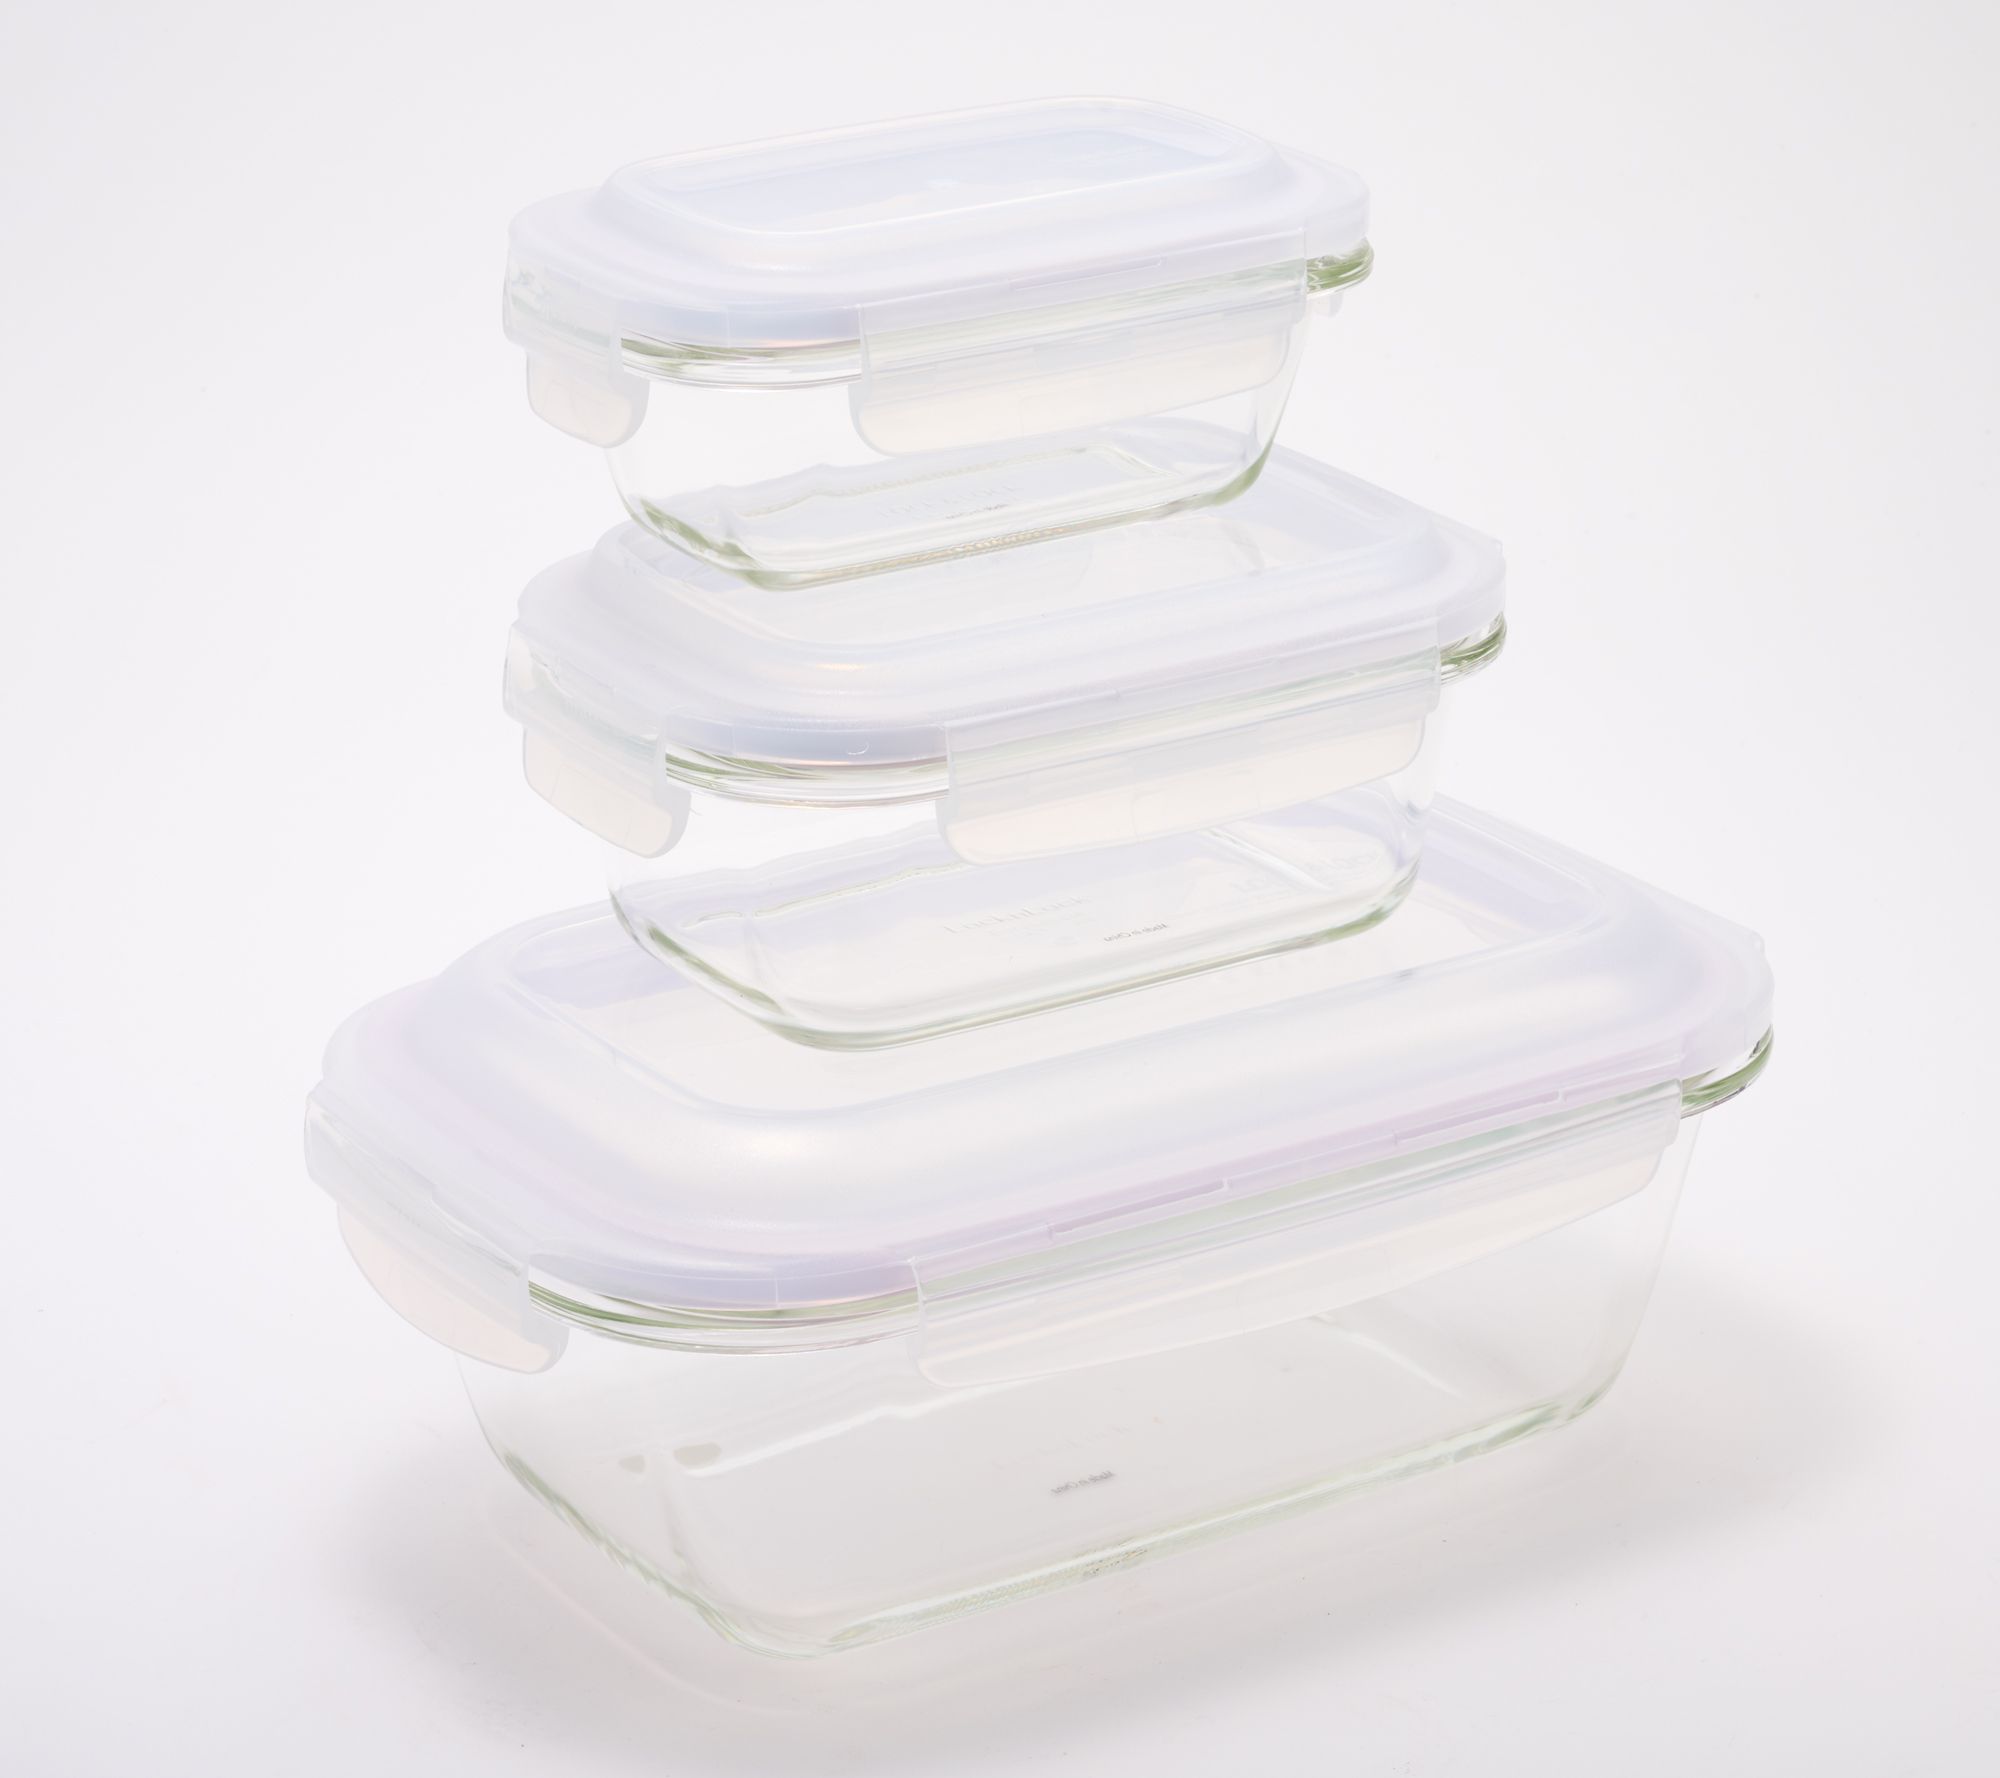 LocknLock Purely Better Glass Divided Food Storage 25oz 3 PC Set - Clear - 3 Piece